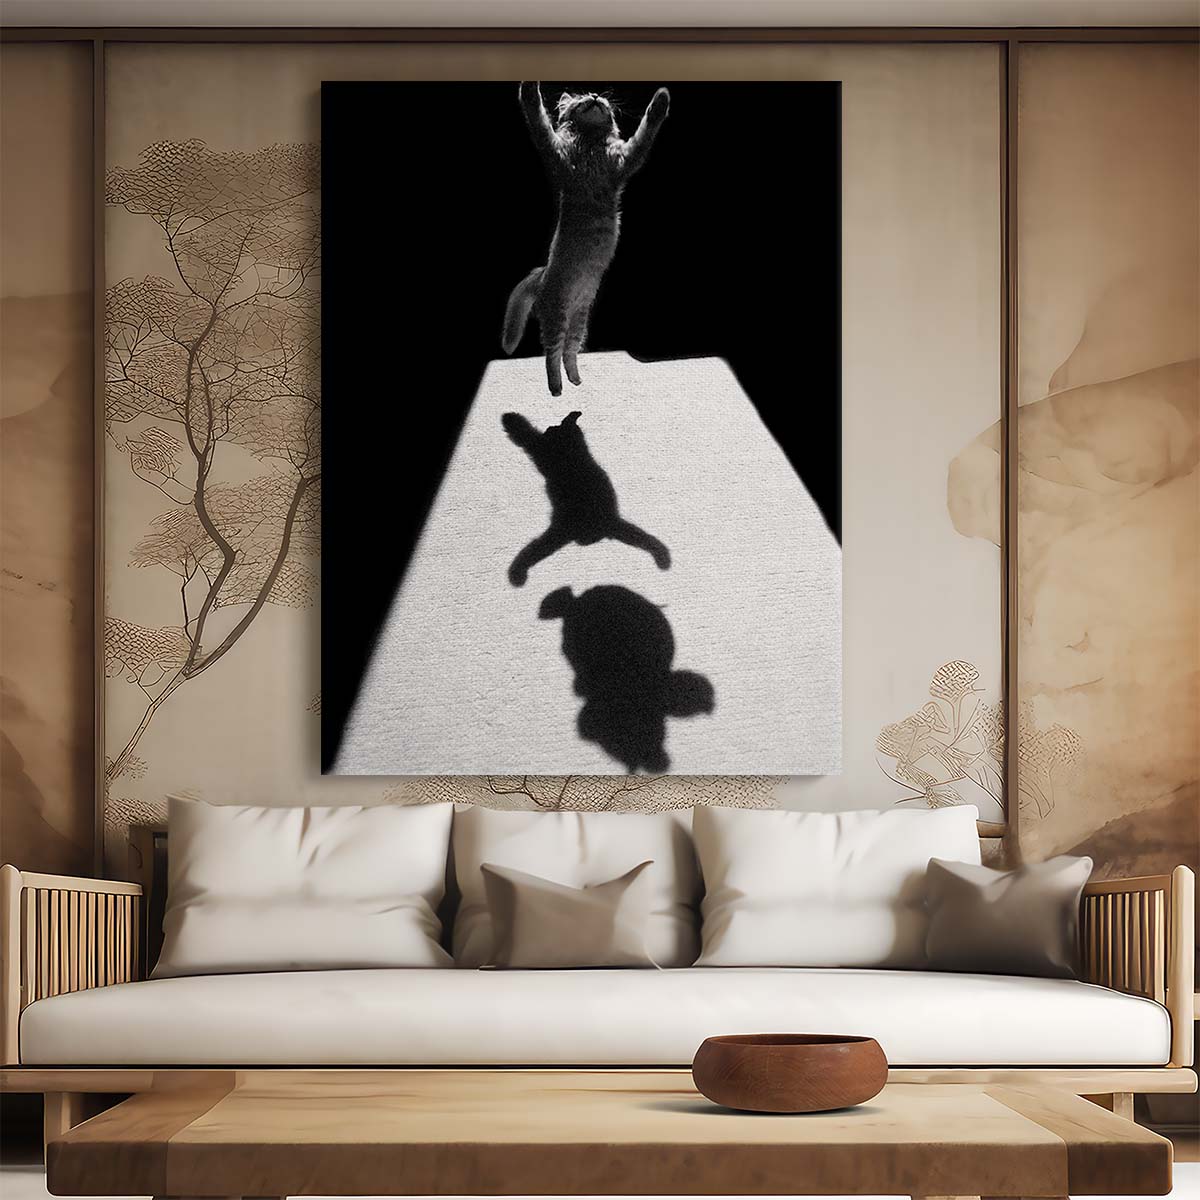 Minimalist Monochrome Photography of Playful Cat Leaping in Shadows by Luxuriance Designs, made in USA